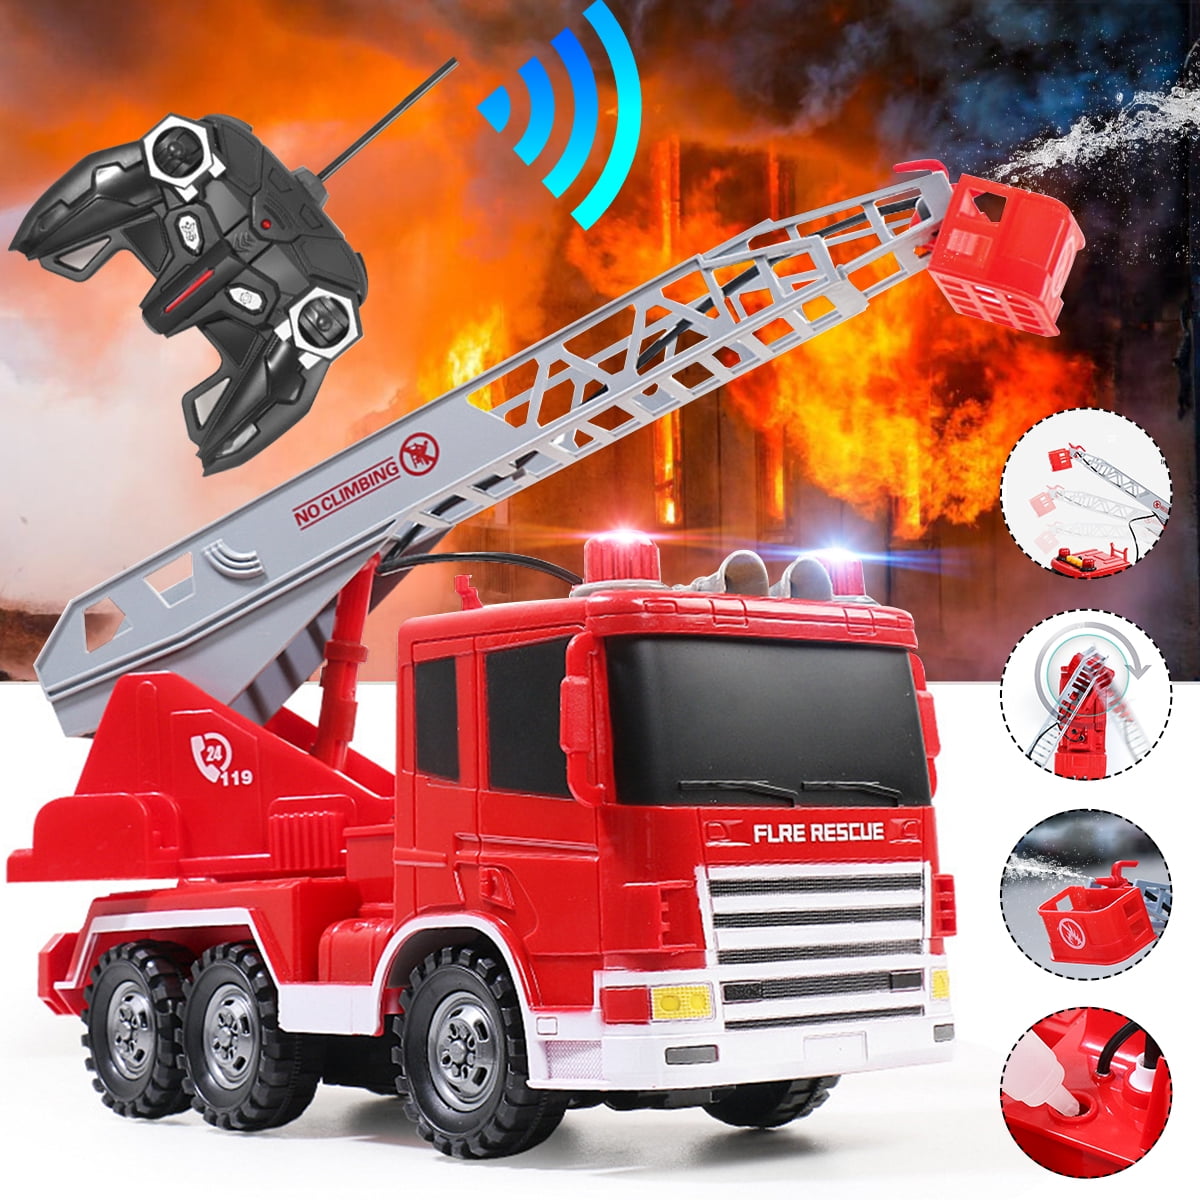 deAO RC Fire Truck 6 Channel Full Function Driving Wheel Remote Control KIDS TOY 